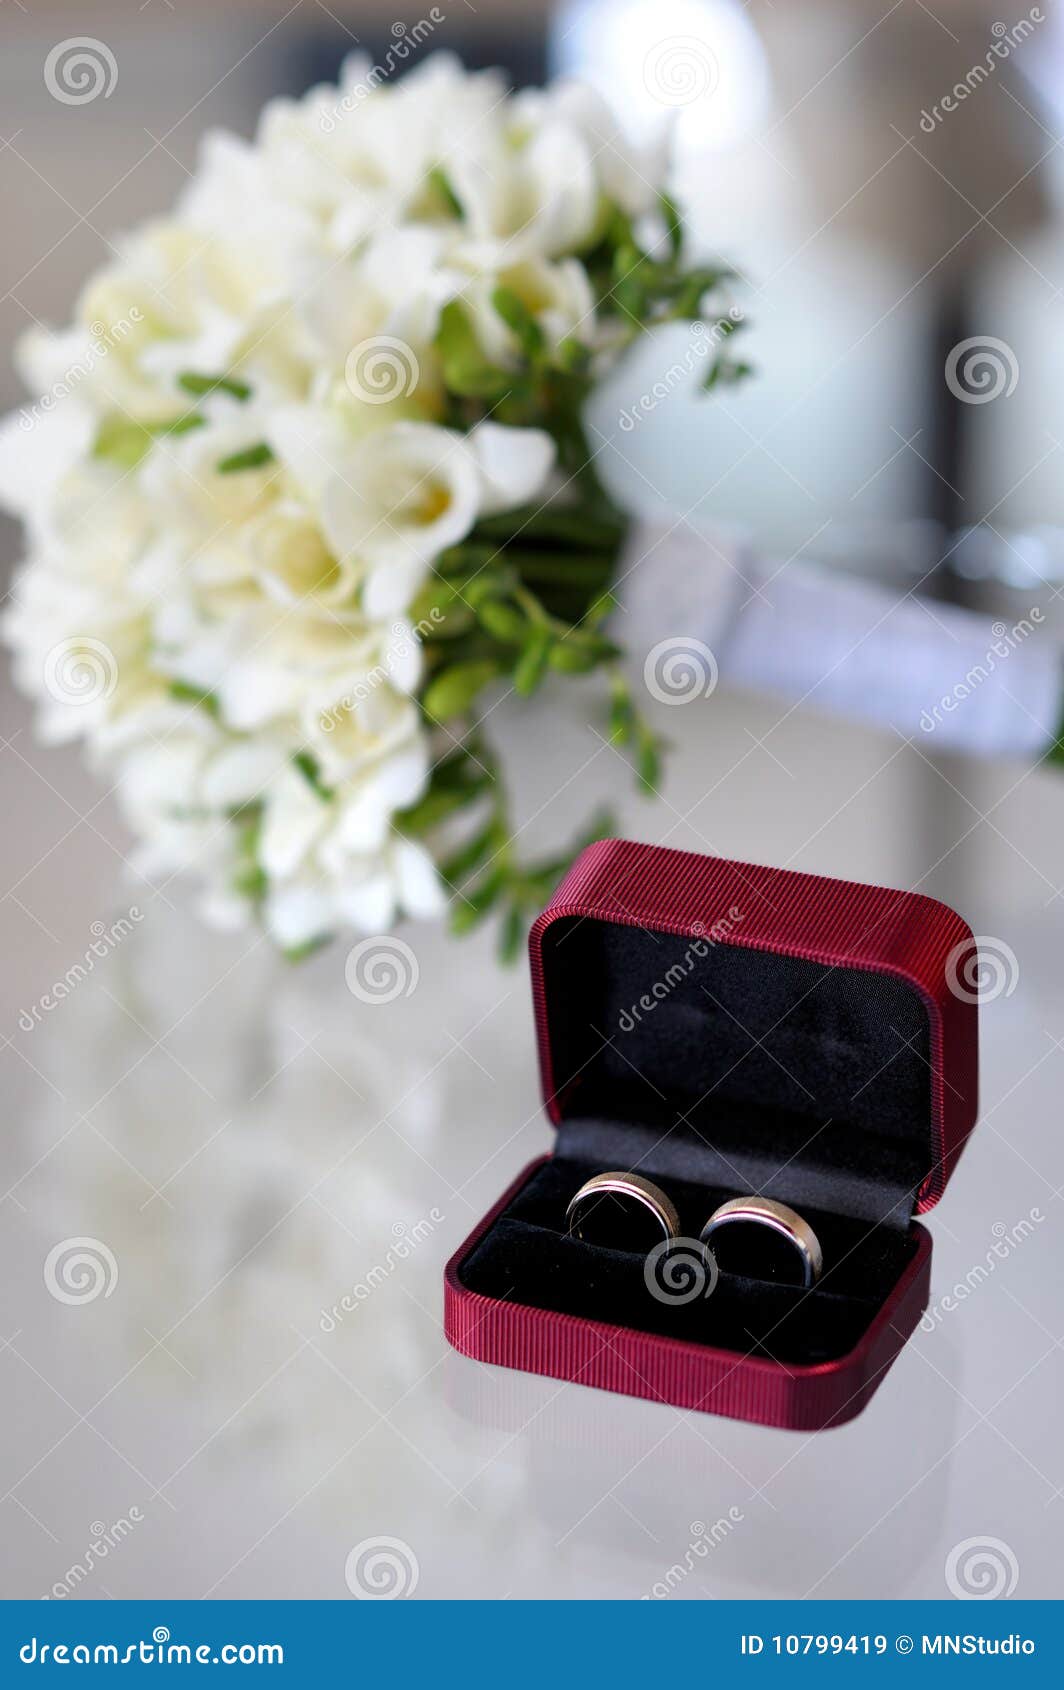 Wedding rings and flowers stock image. Image of engagement - 10799419